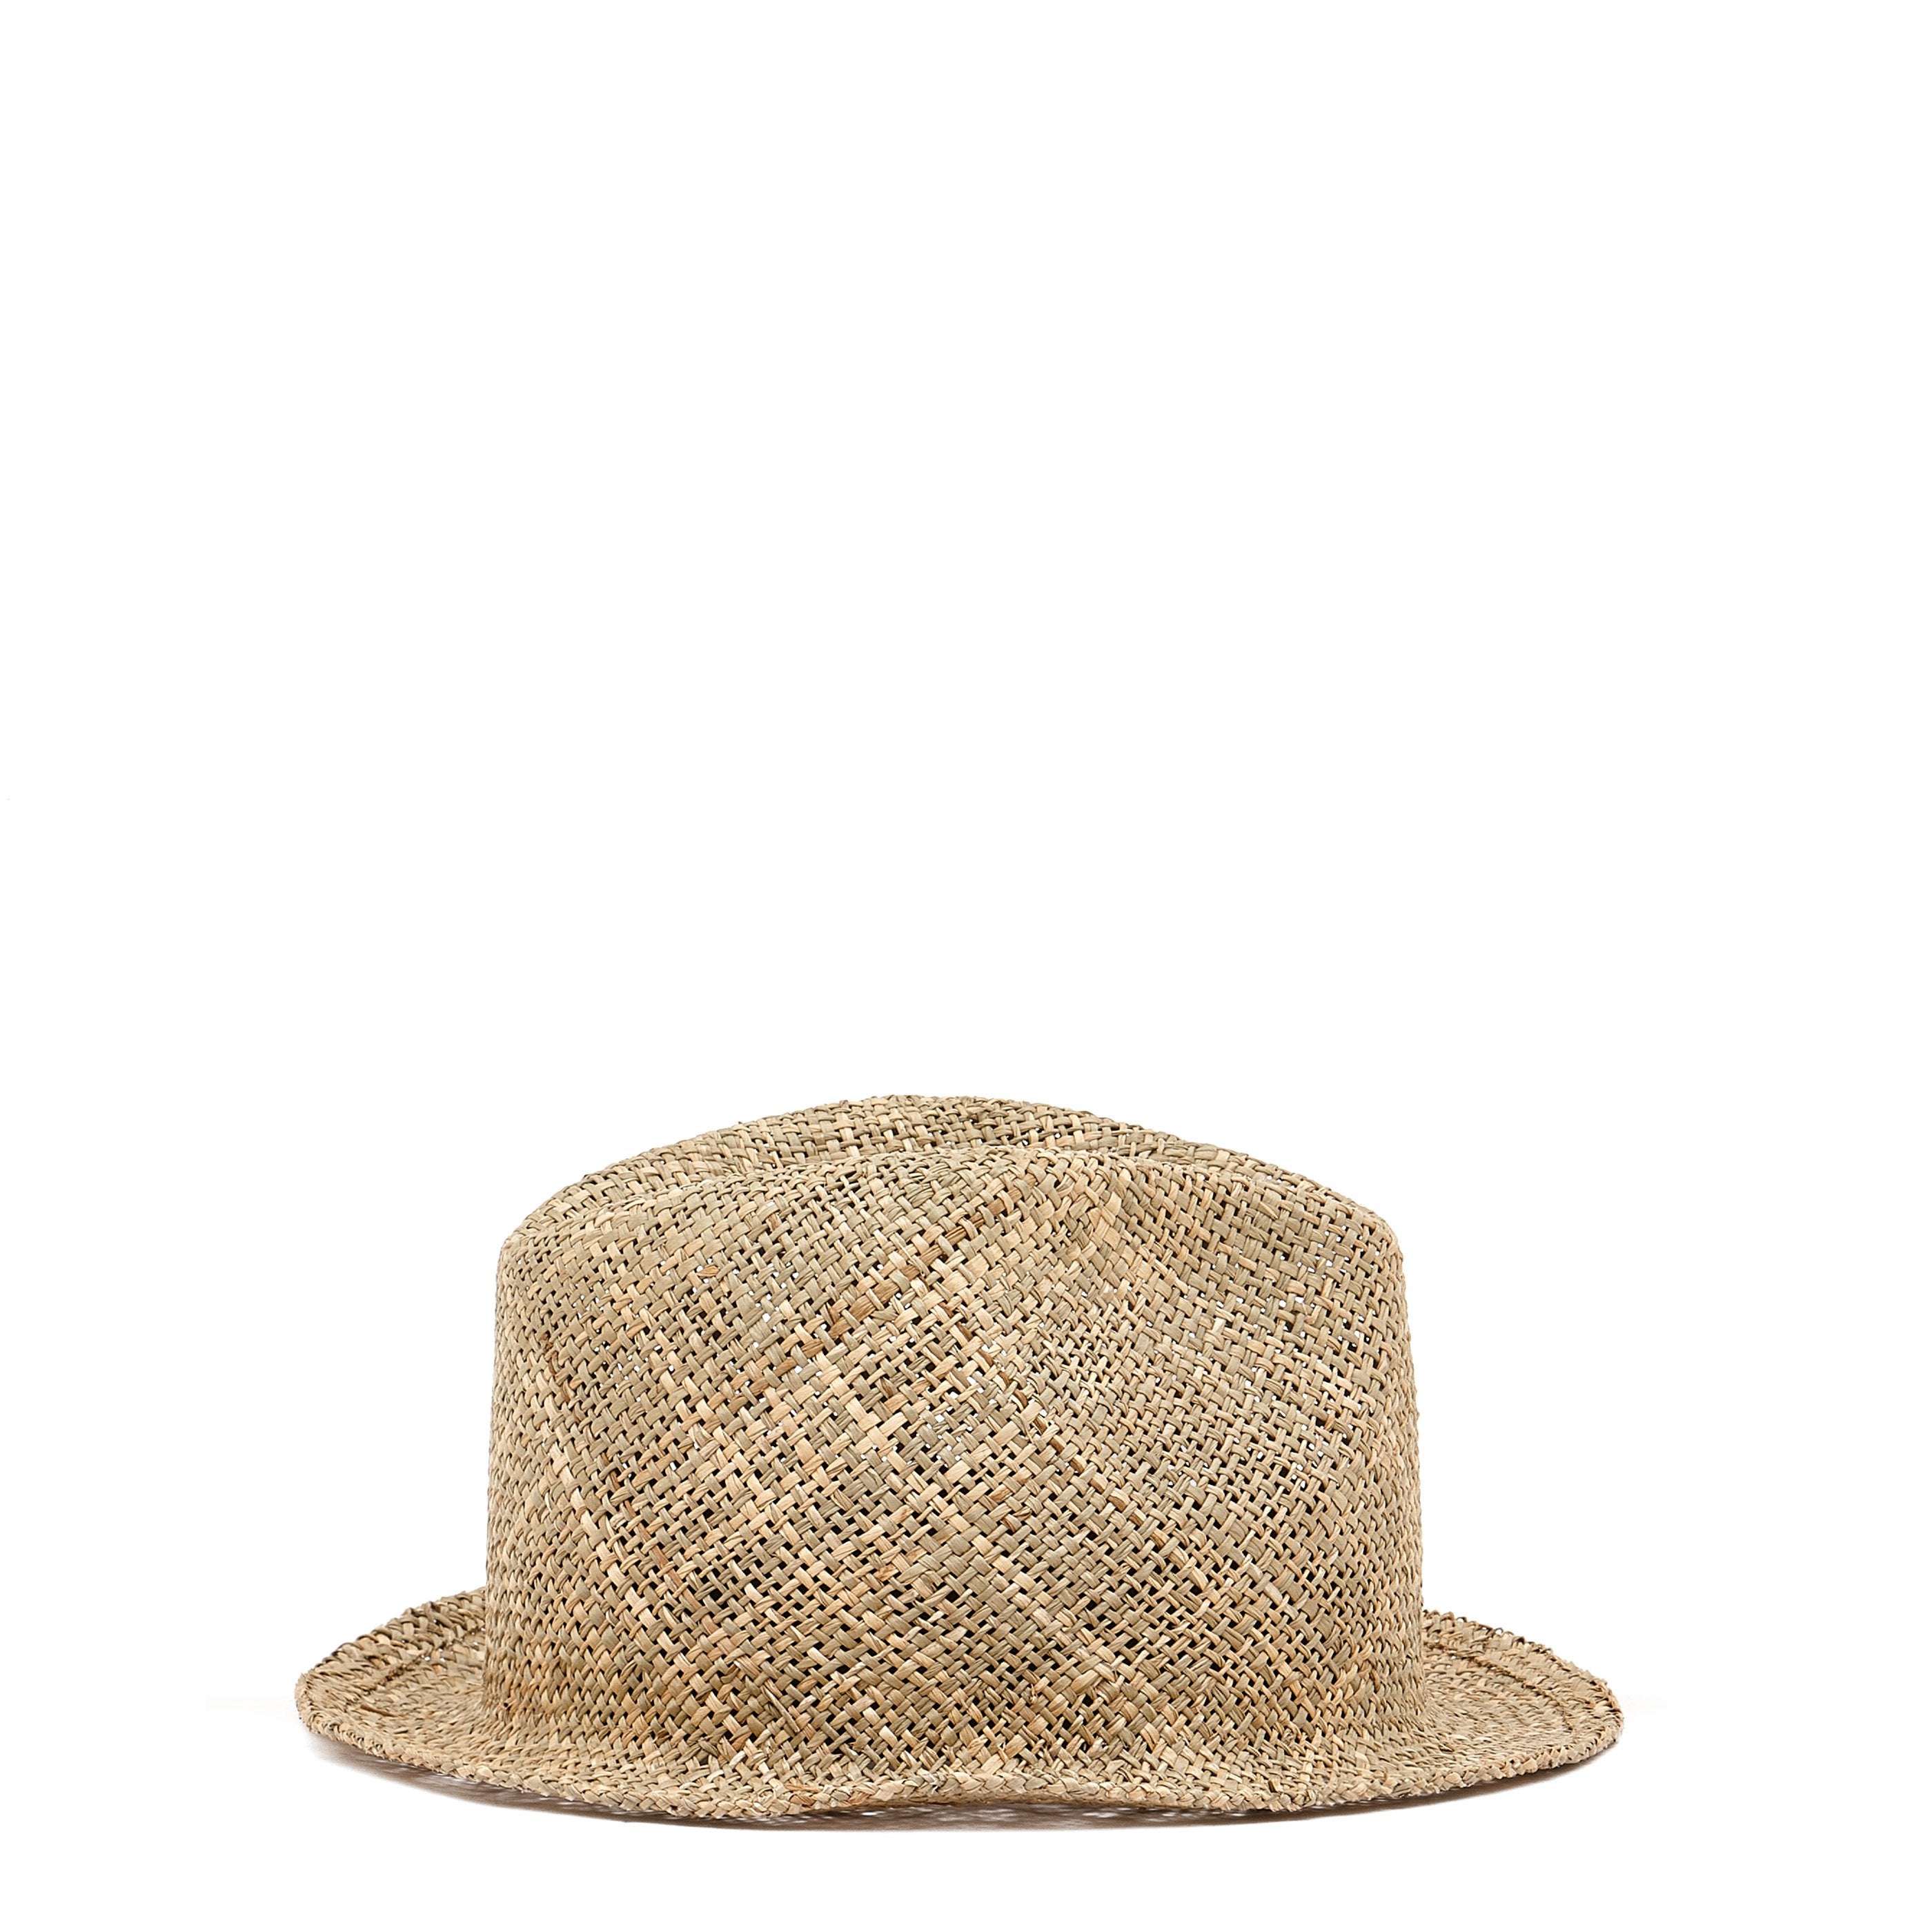 Vienna | Hat in fabric color straw / hay